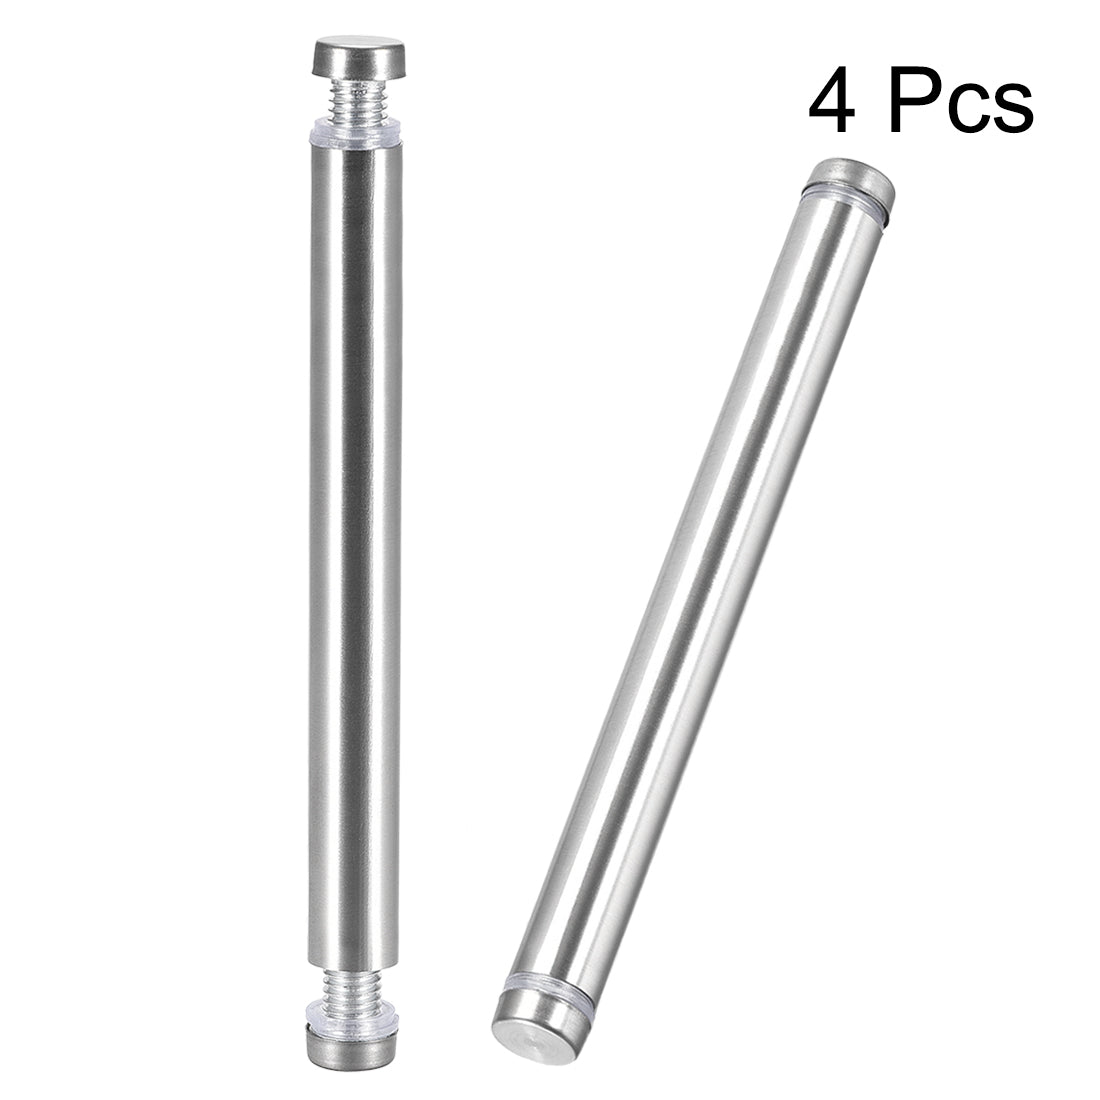 uxcell Uxcell Glass Standoff Double Head Stainless Steel Standoff Holder 12mm x 124mm 4 Pcs